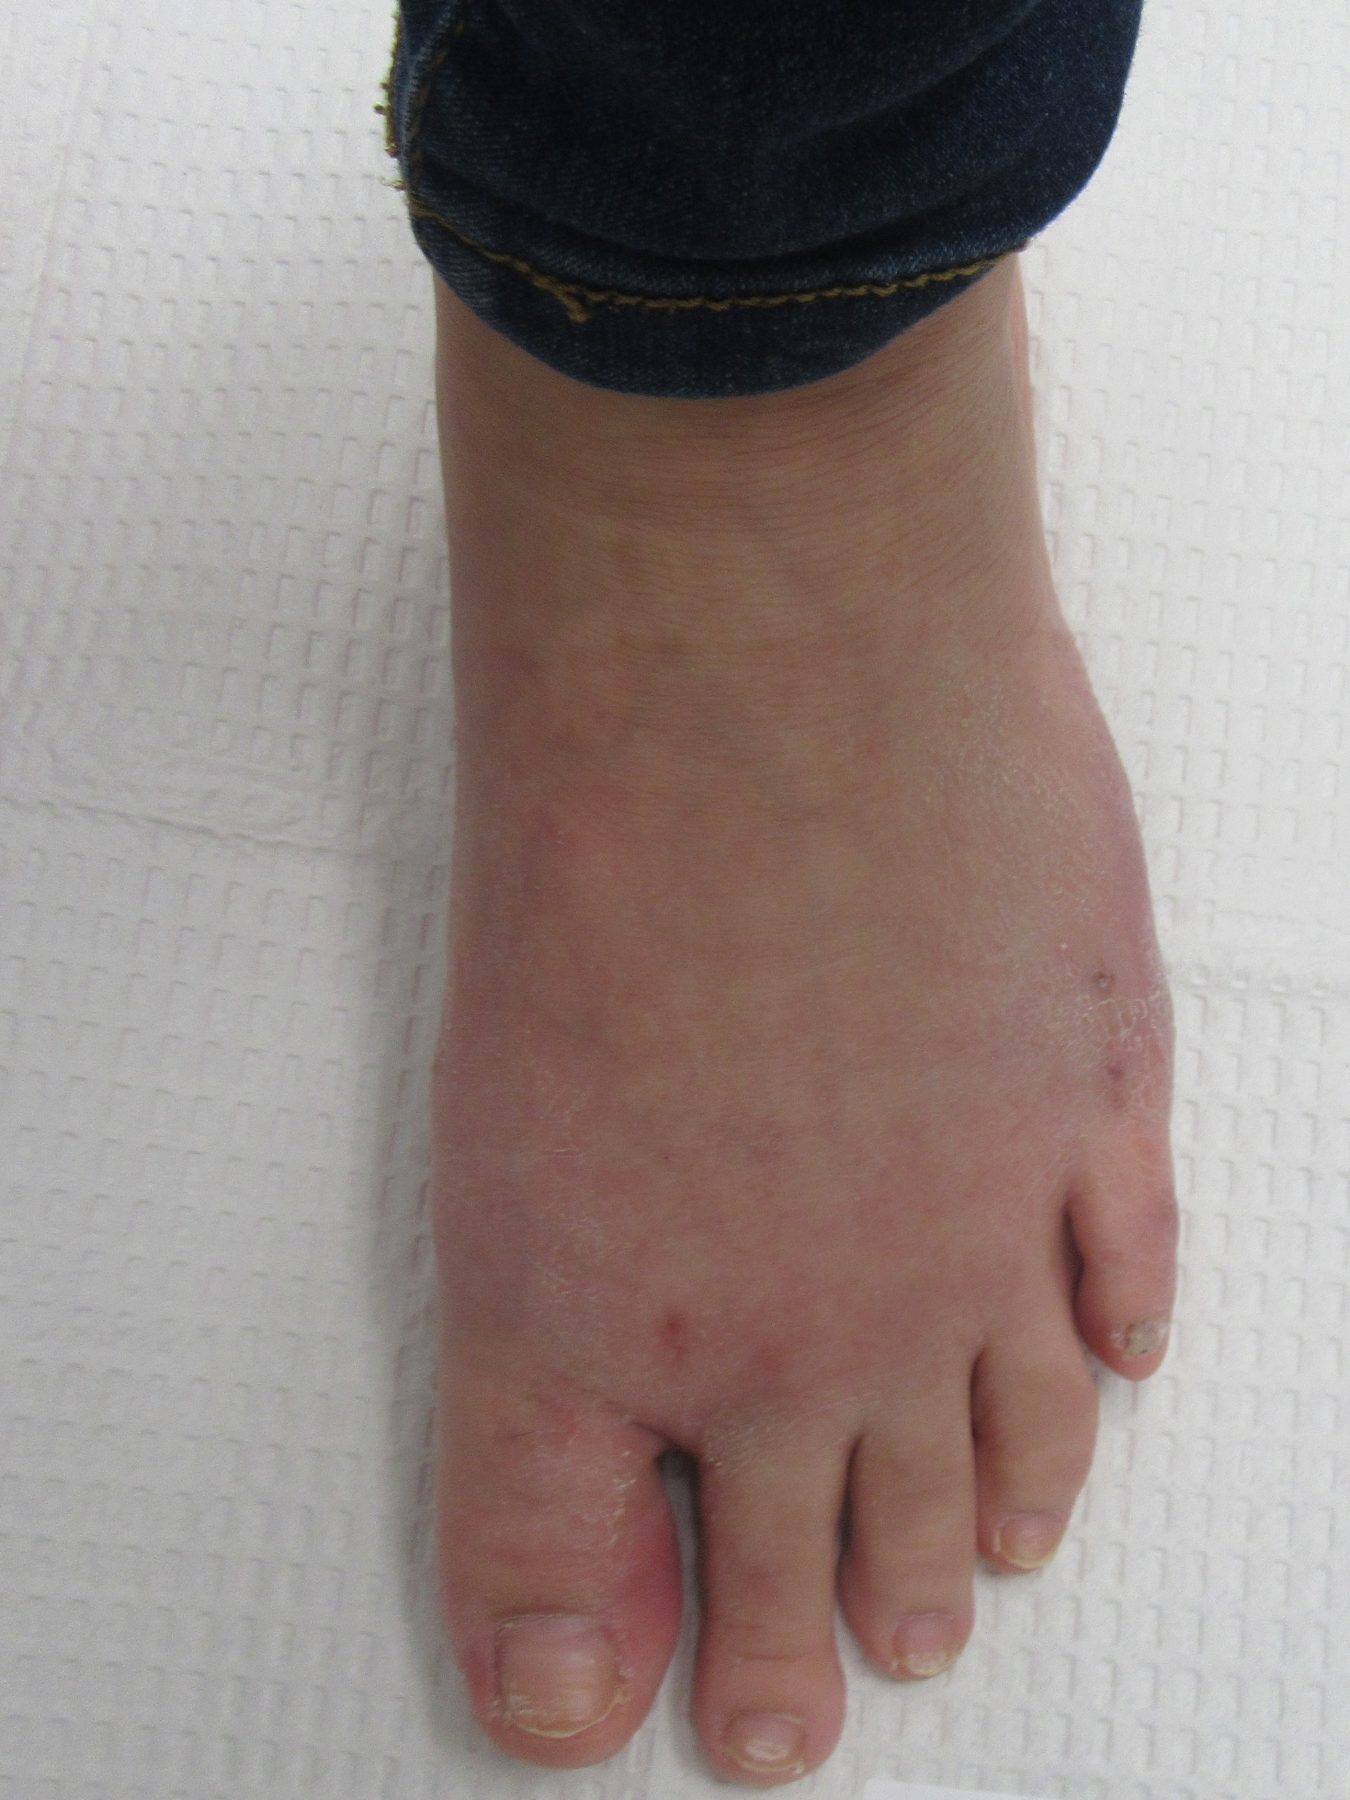 No bunion after sugery.2